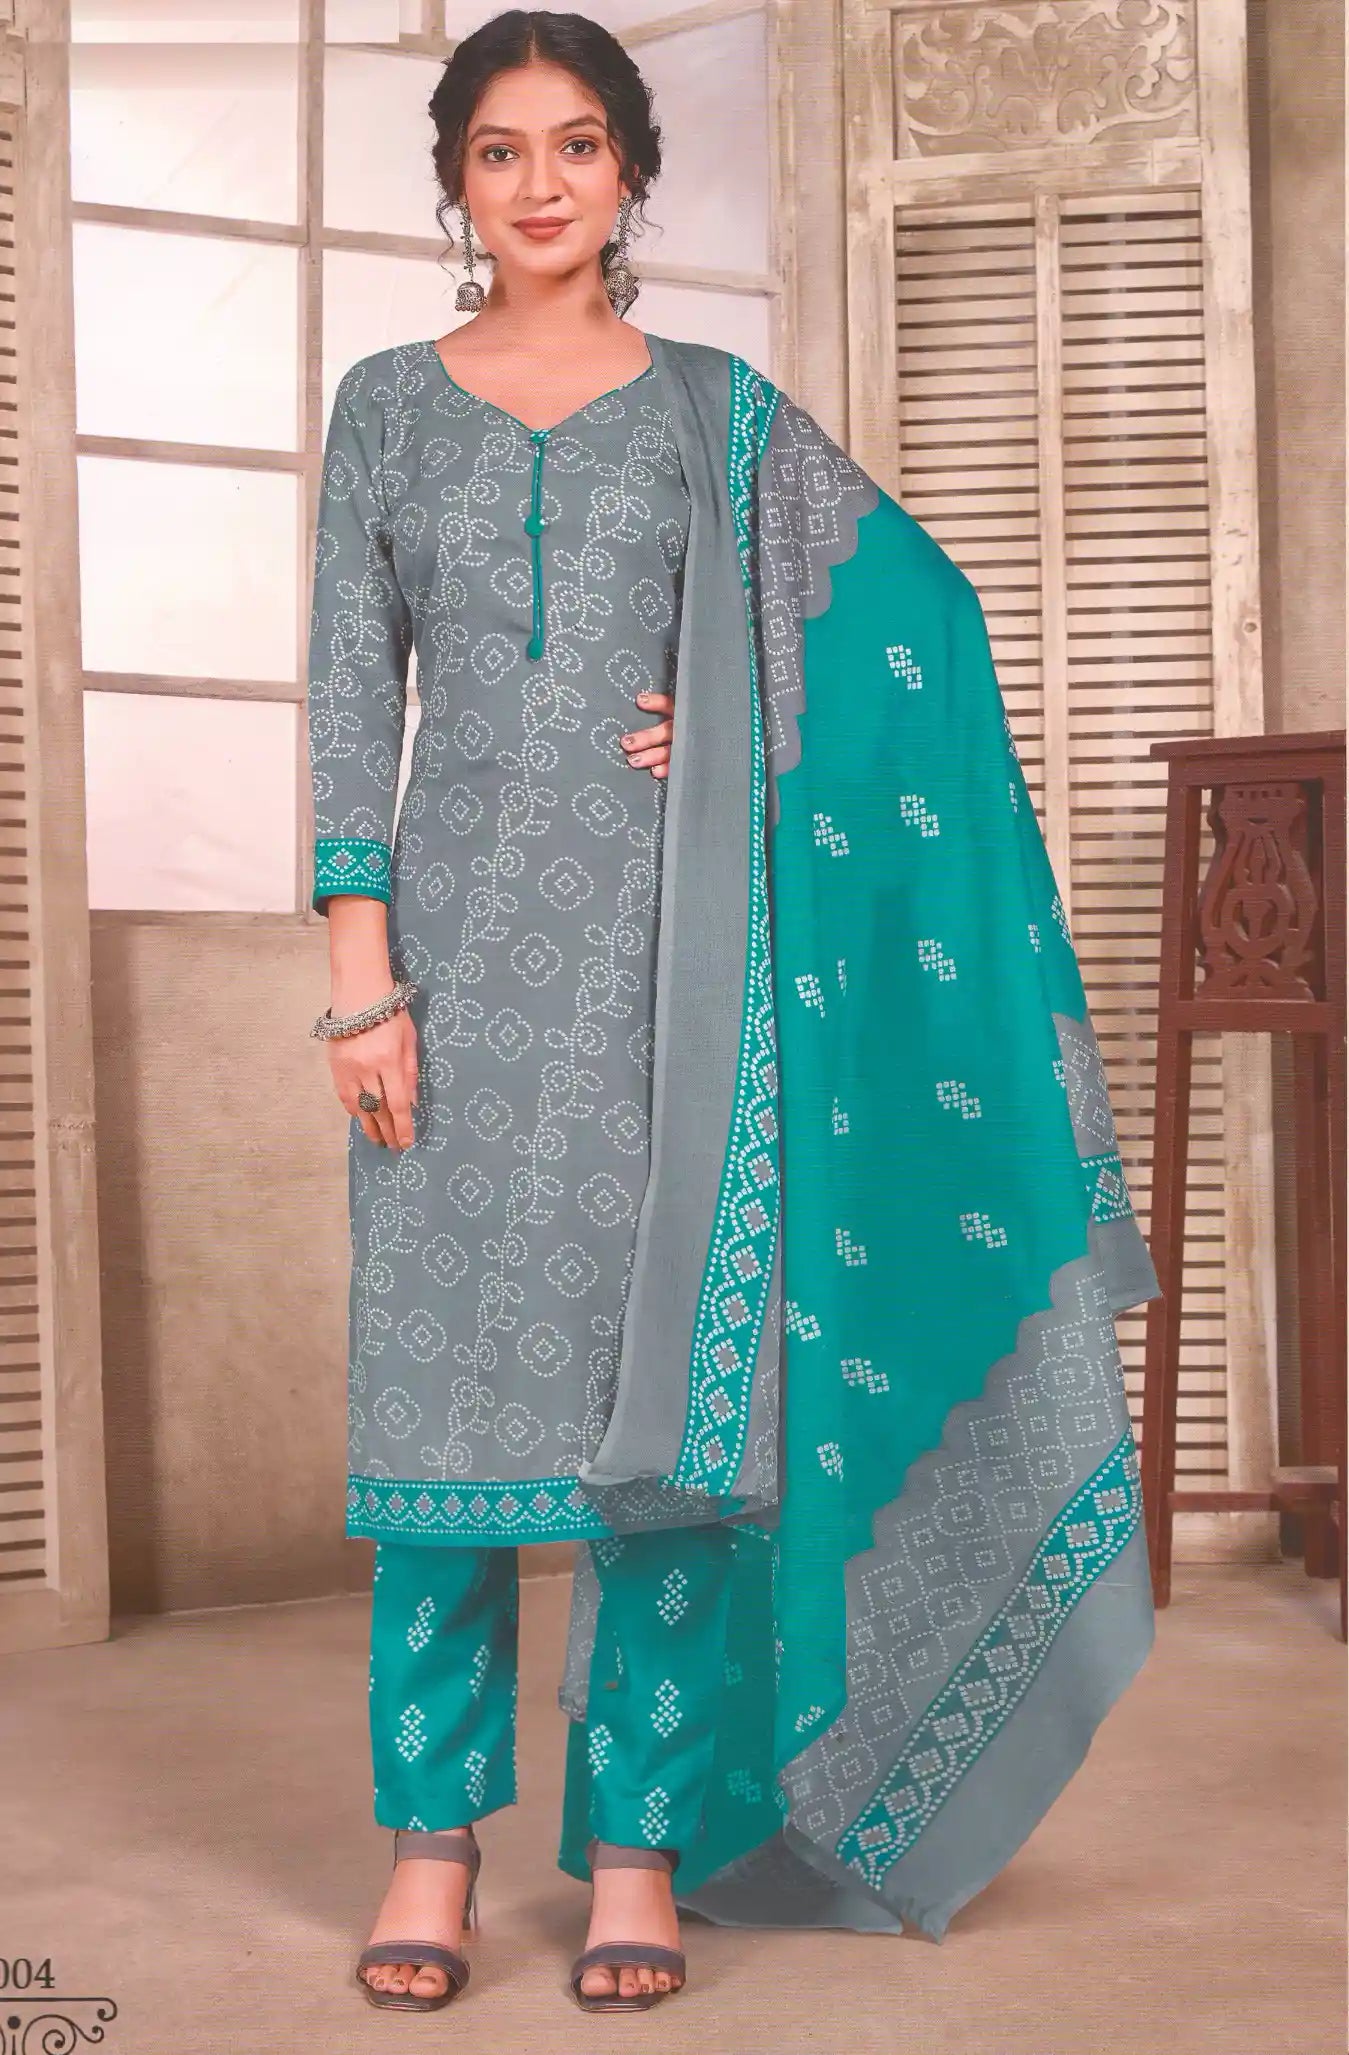 Fancy Neck work Designer Dress Material at Rs.999/Piece in dehradun offer  by Subhash Company